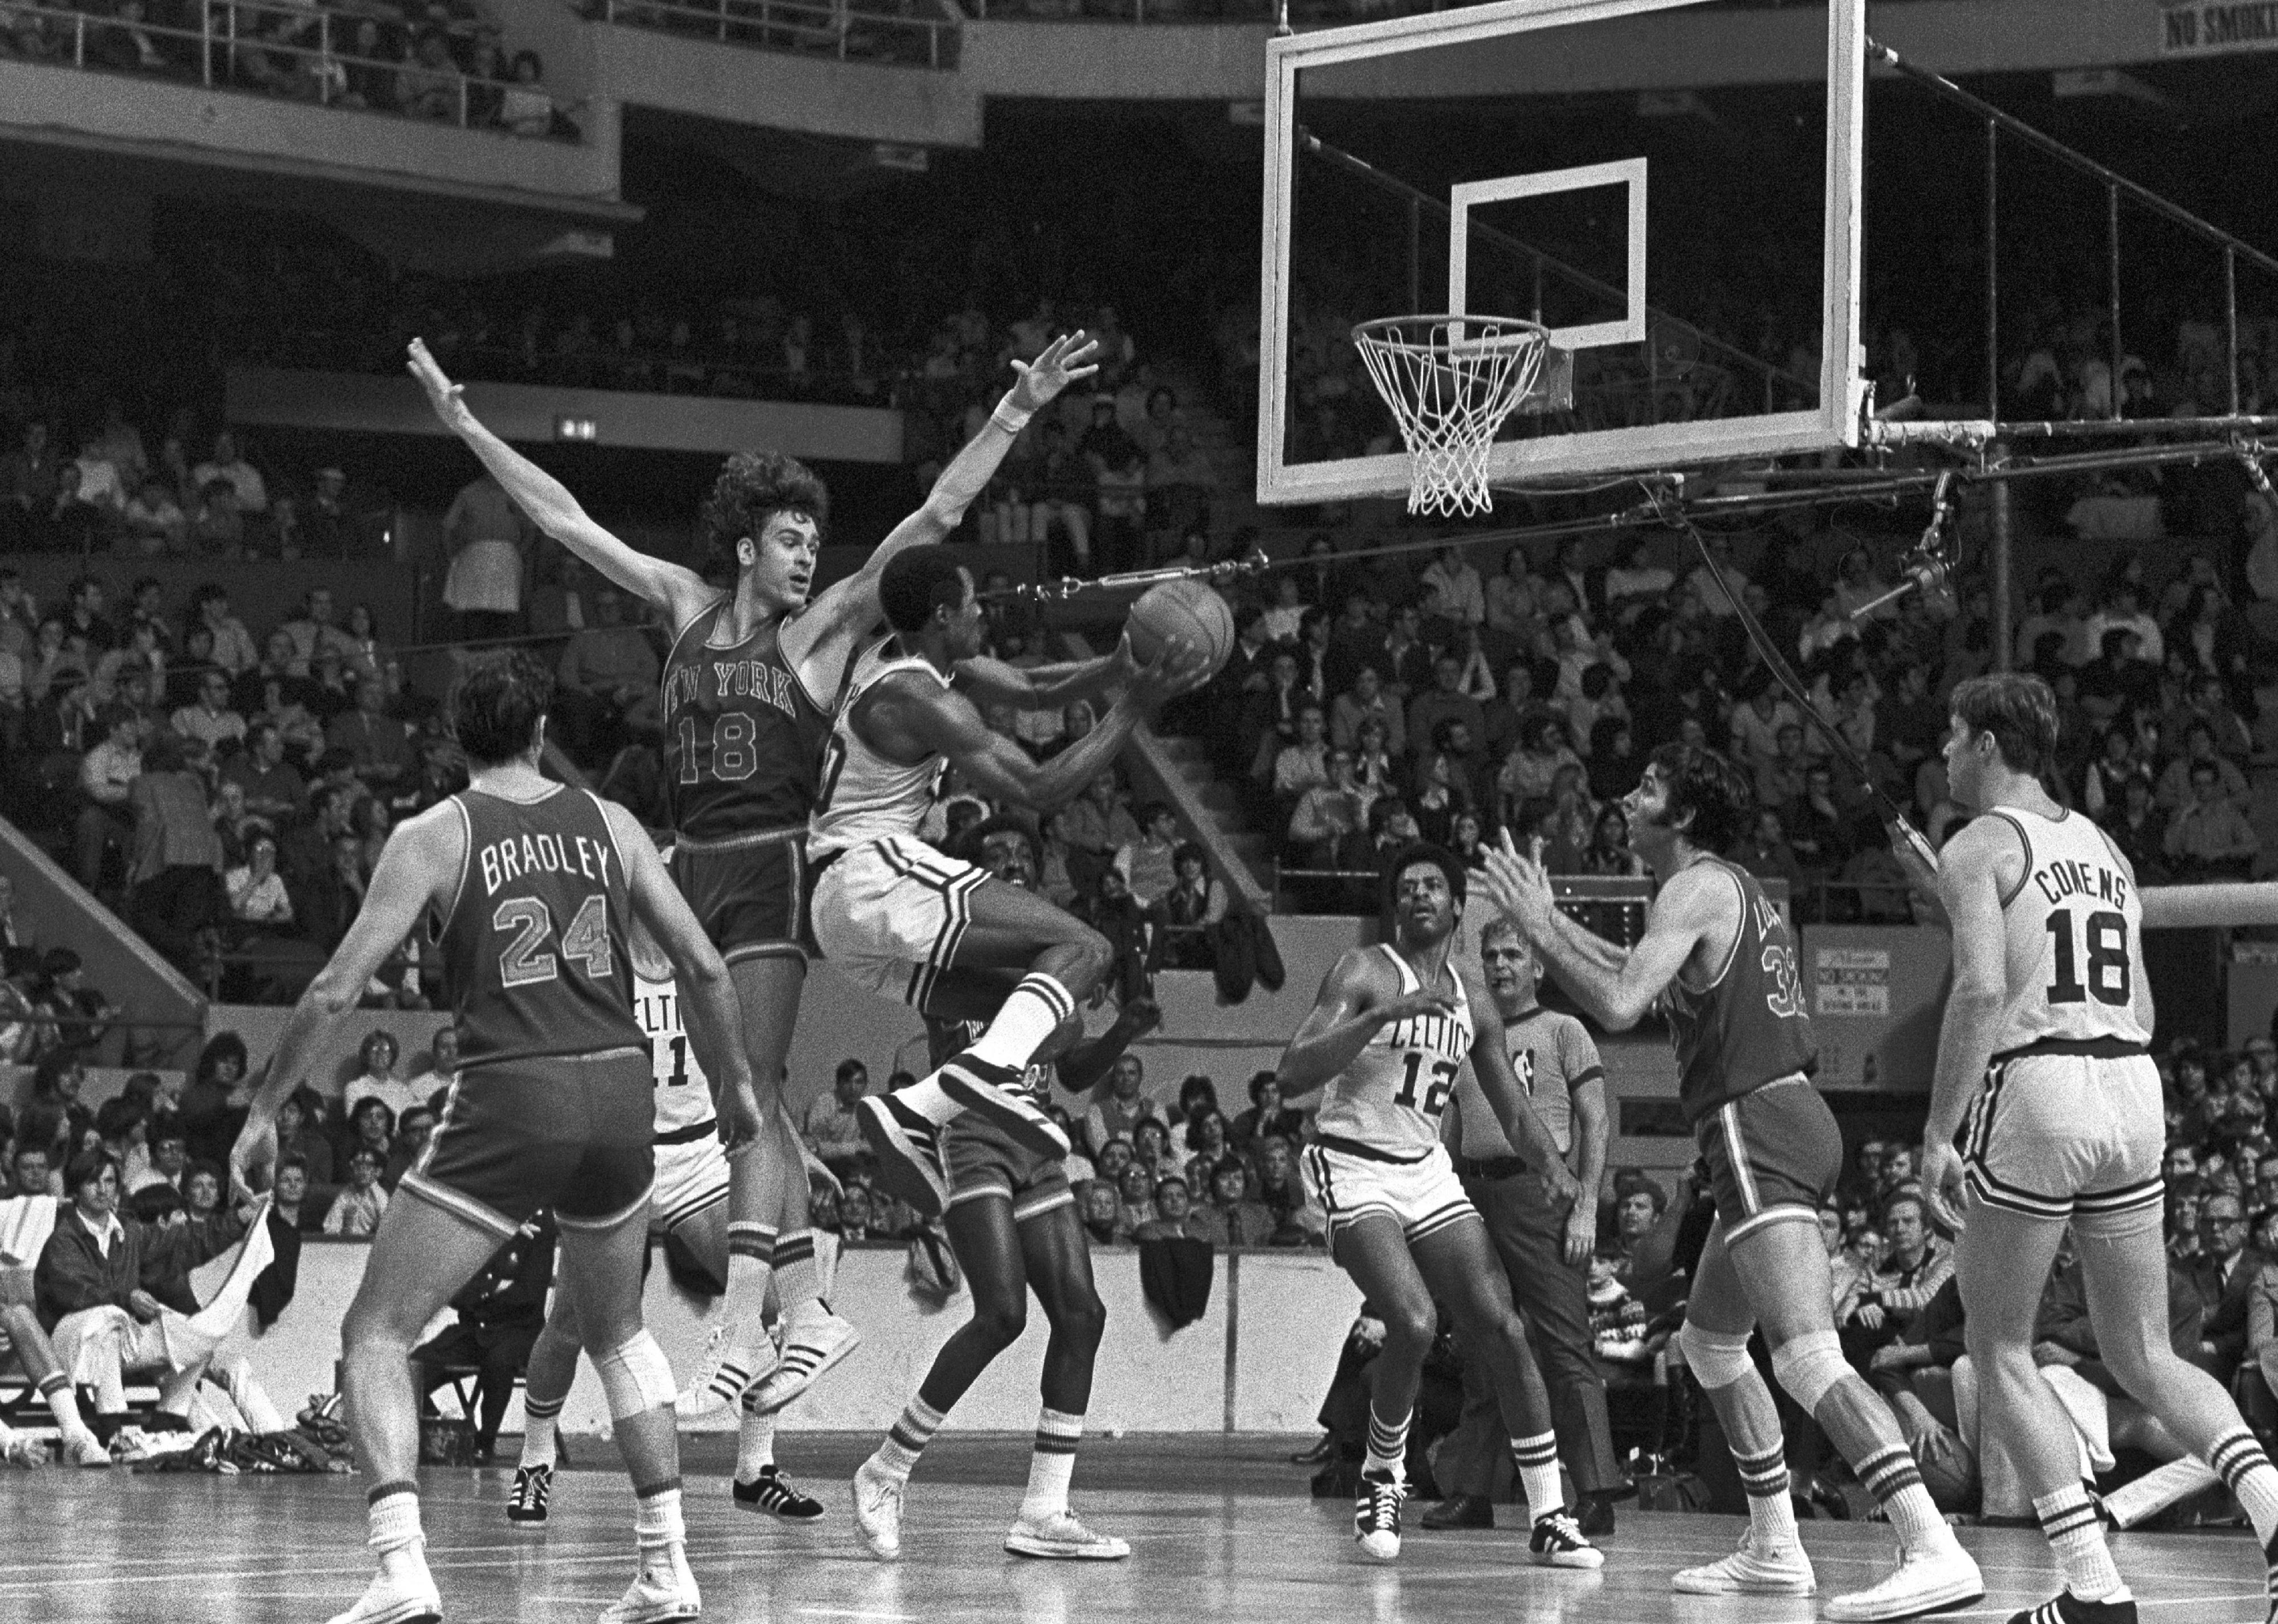 Jo Jo White of the Boston Celtics jumps during a game against the New York Knicks.